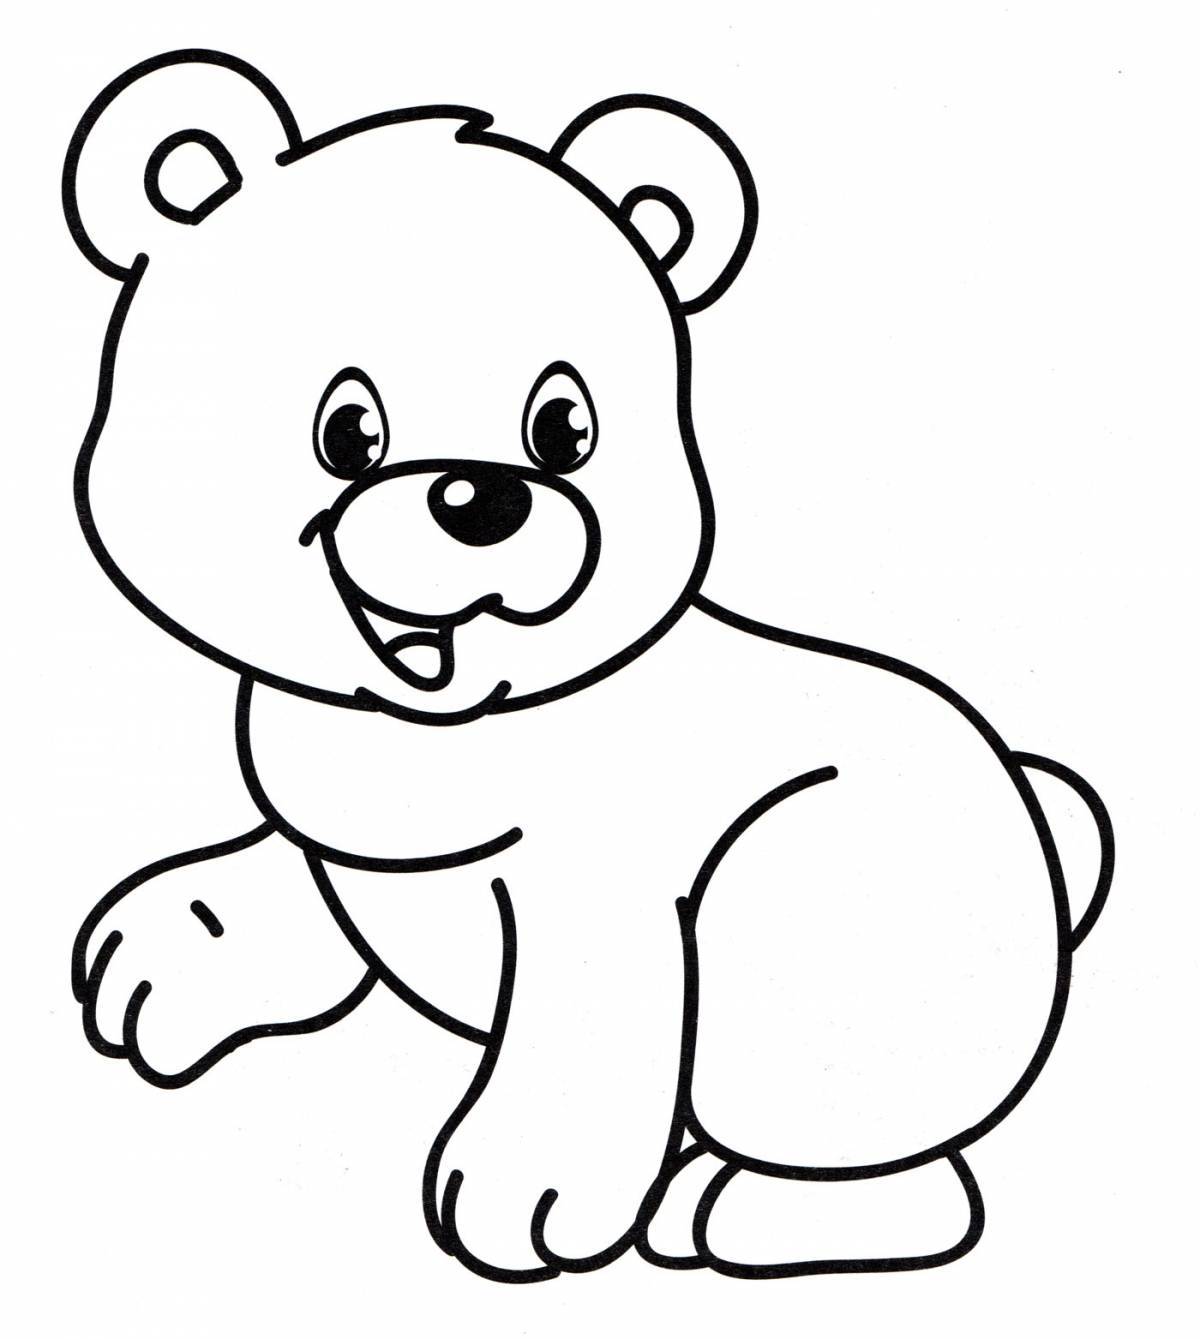 Glowing teddy bear coloring page